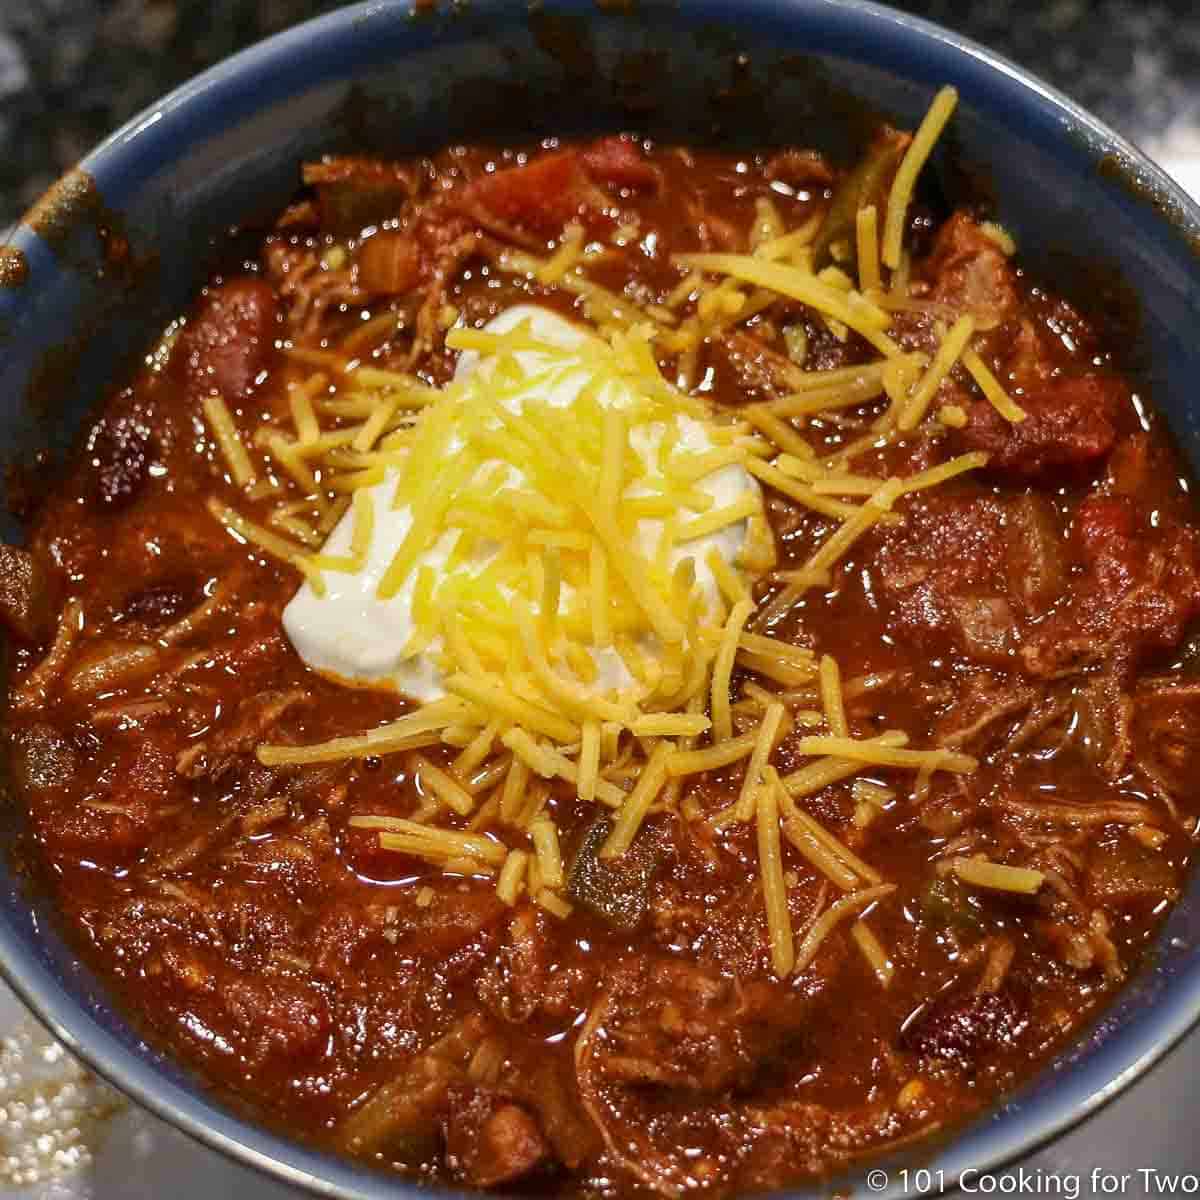 Chuck roast chili in a blue bowl